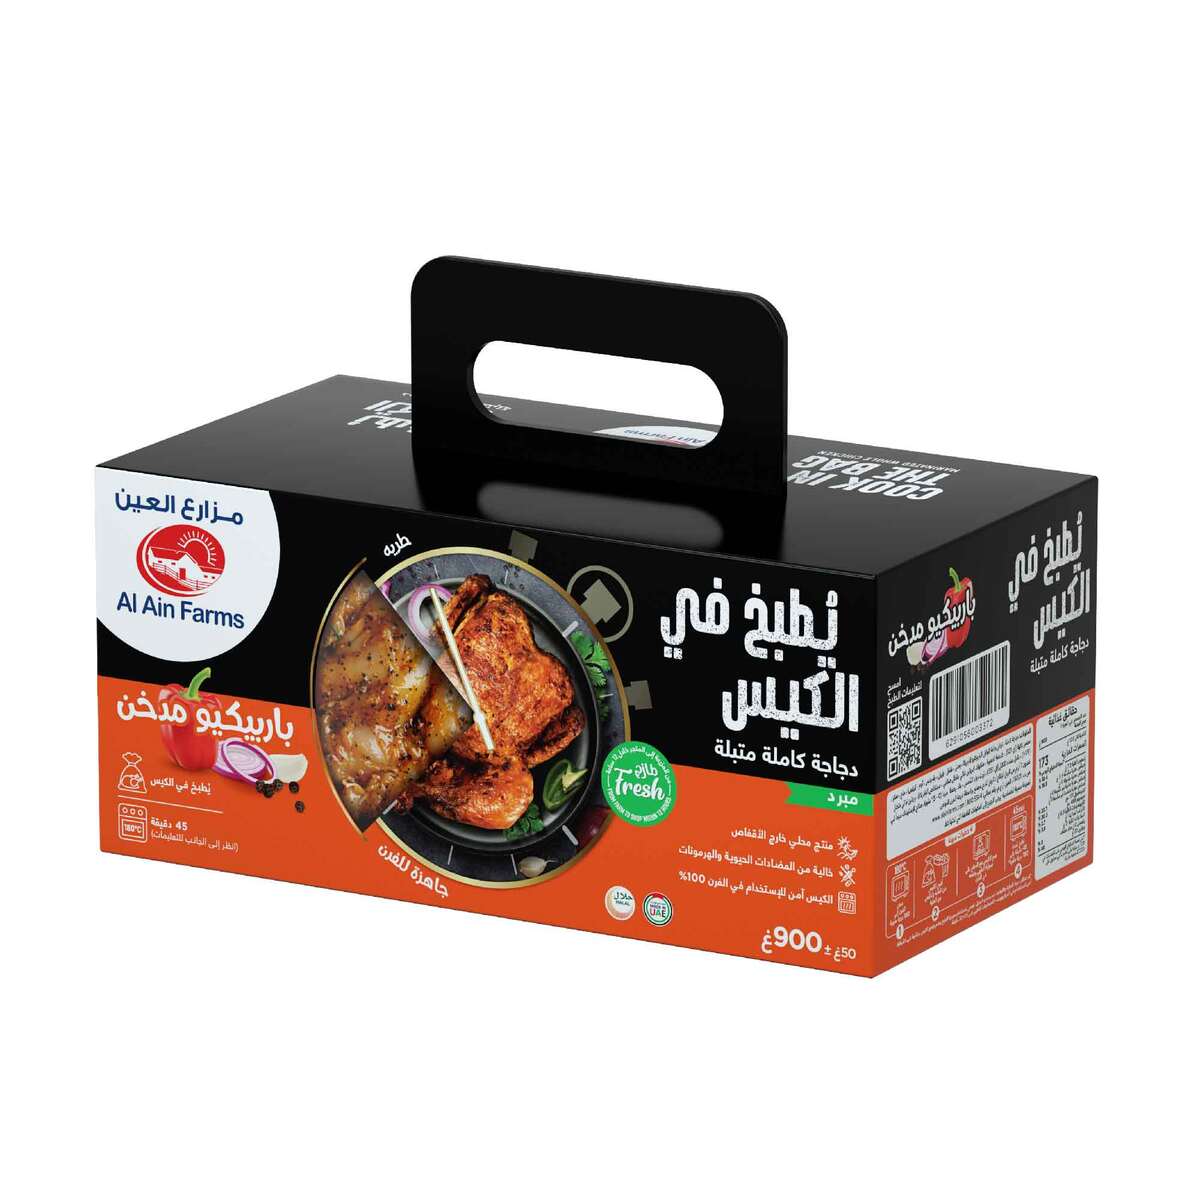 Al Ain Cook In The Bag Smoked BBQ Whole Chicken Chilled 900 g